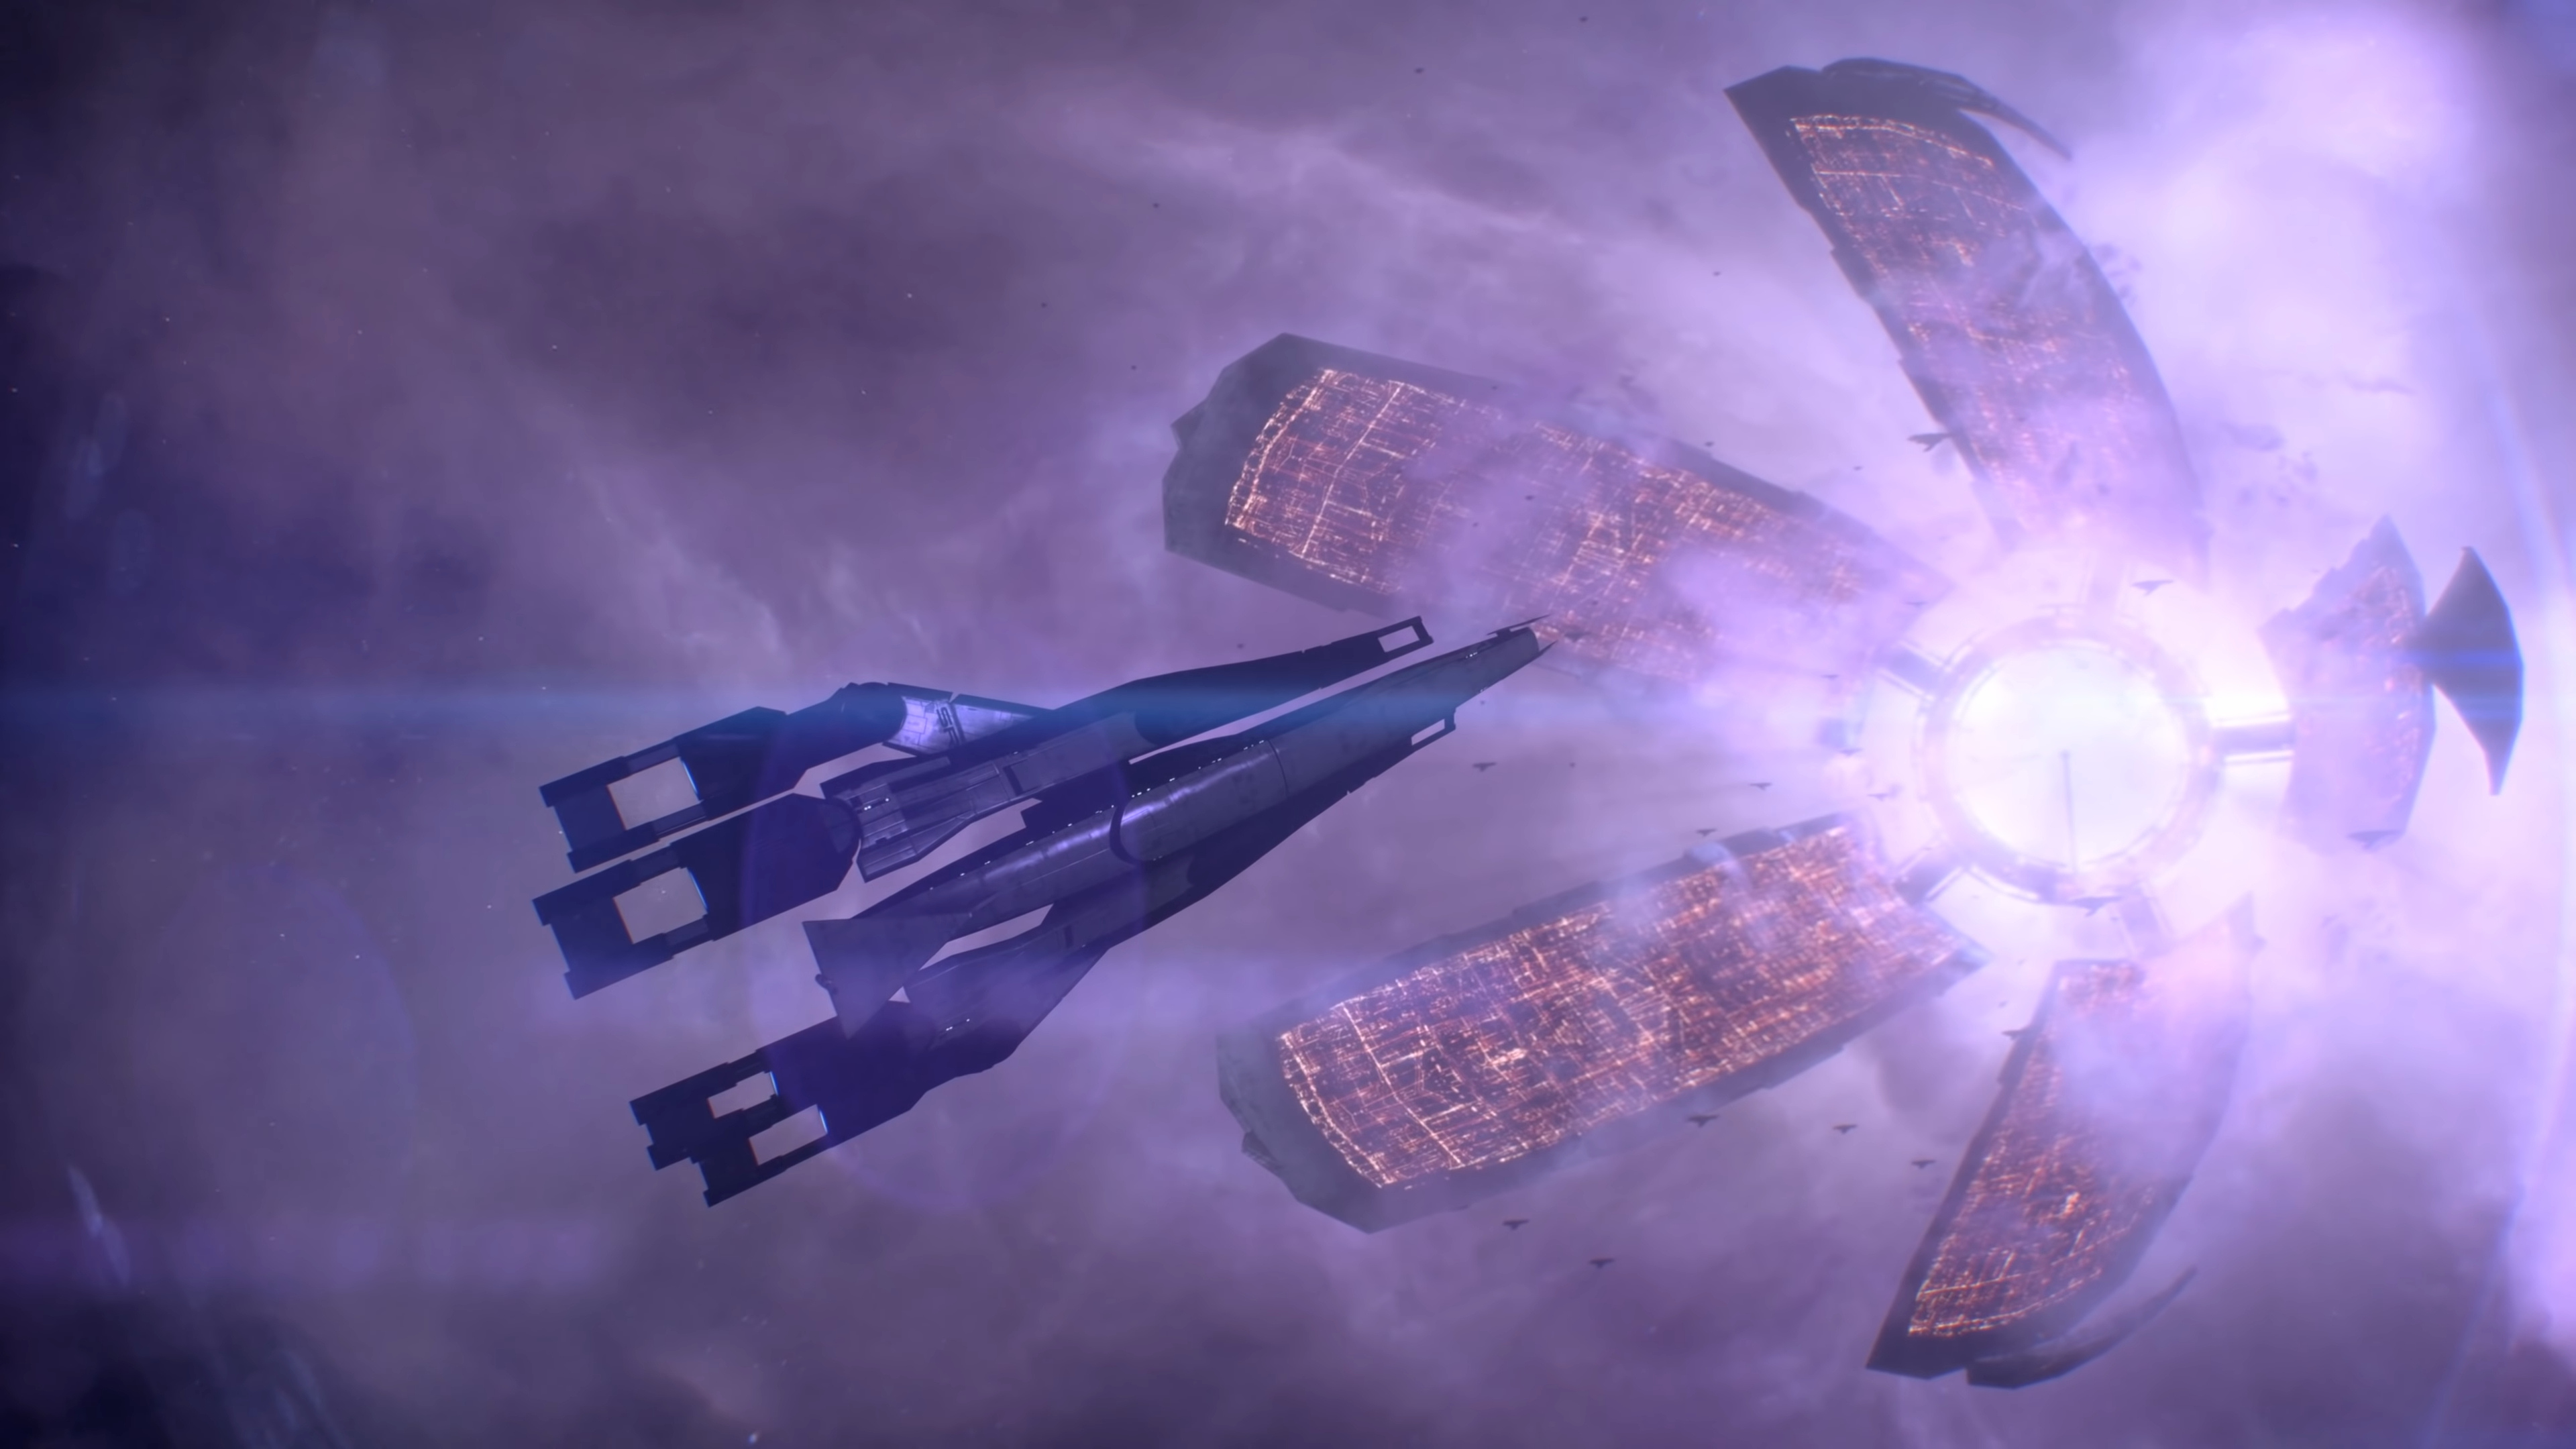 A space ship approaching a larger space vehicle in Mass Effect Legendary Edition.